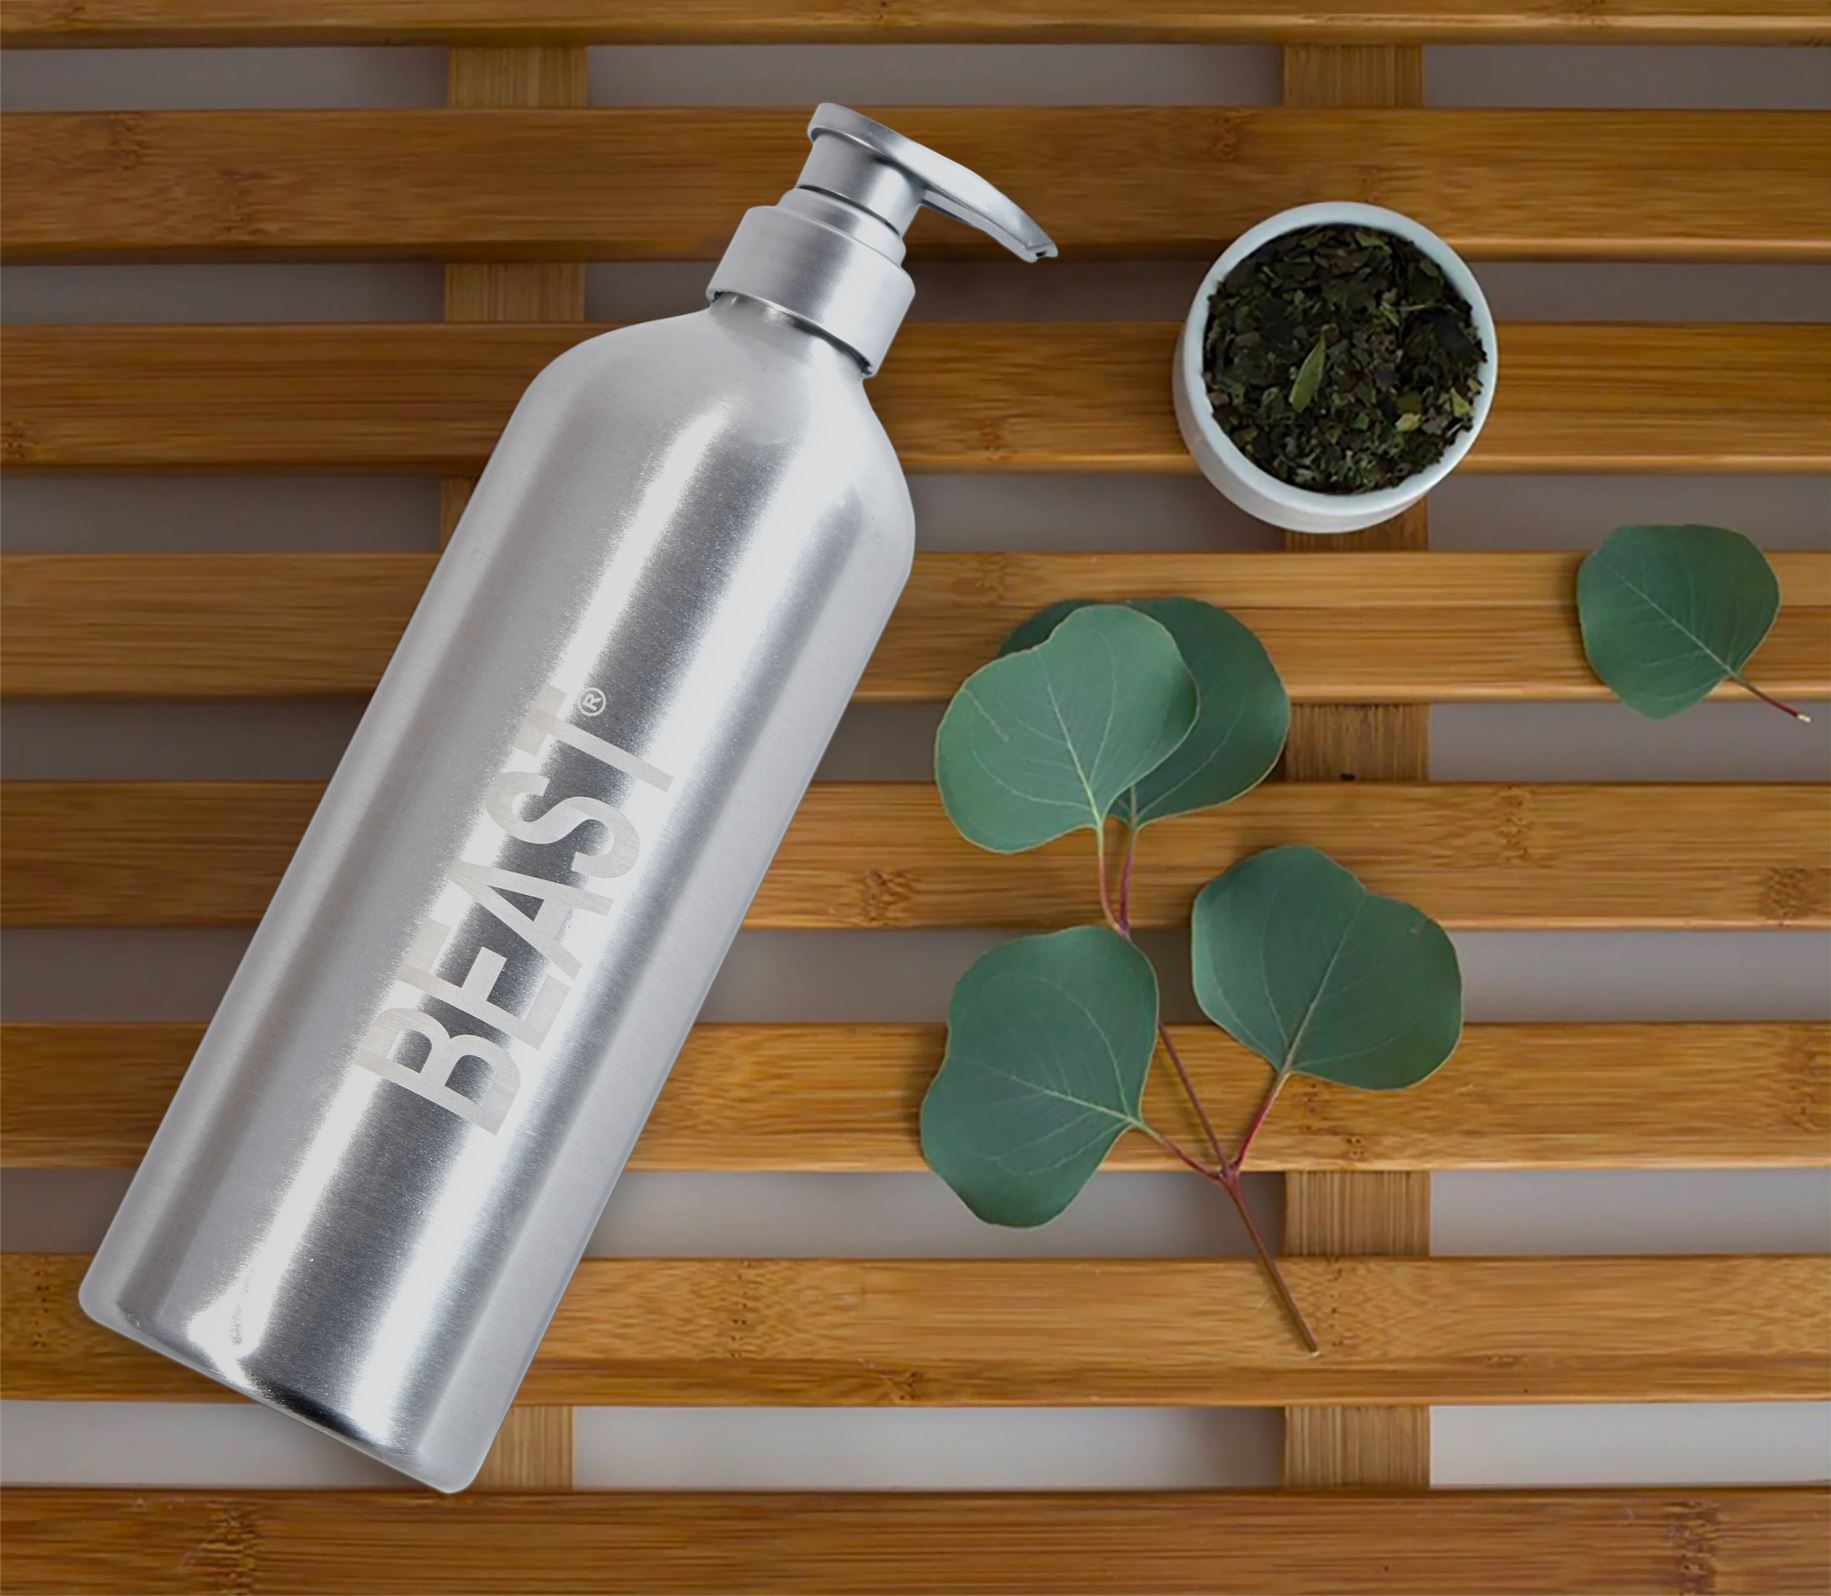 The reusable bottle by Beast made from recycled products.